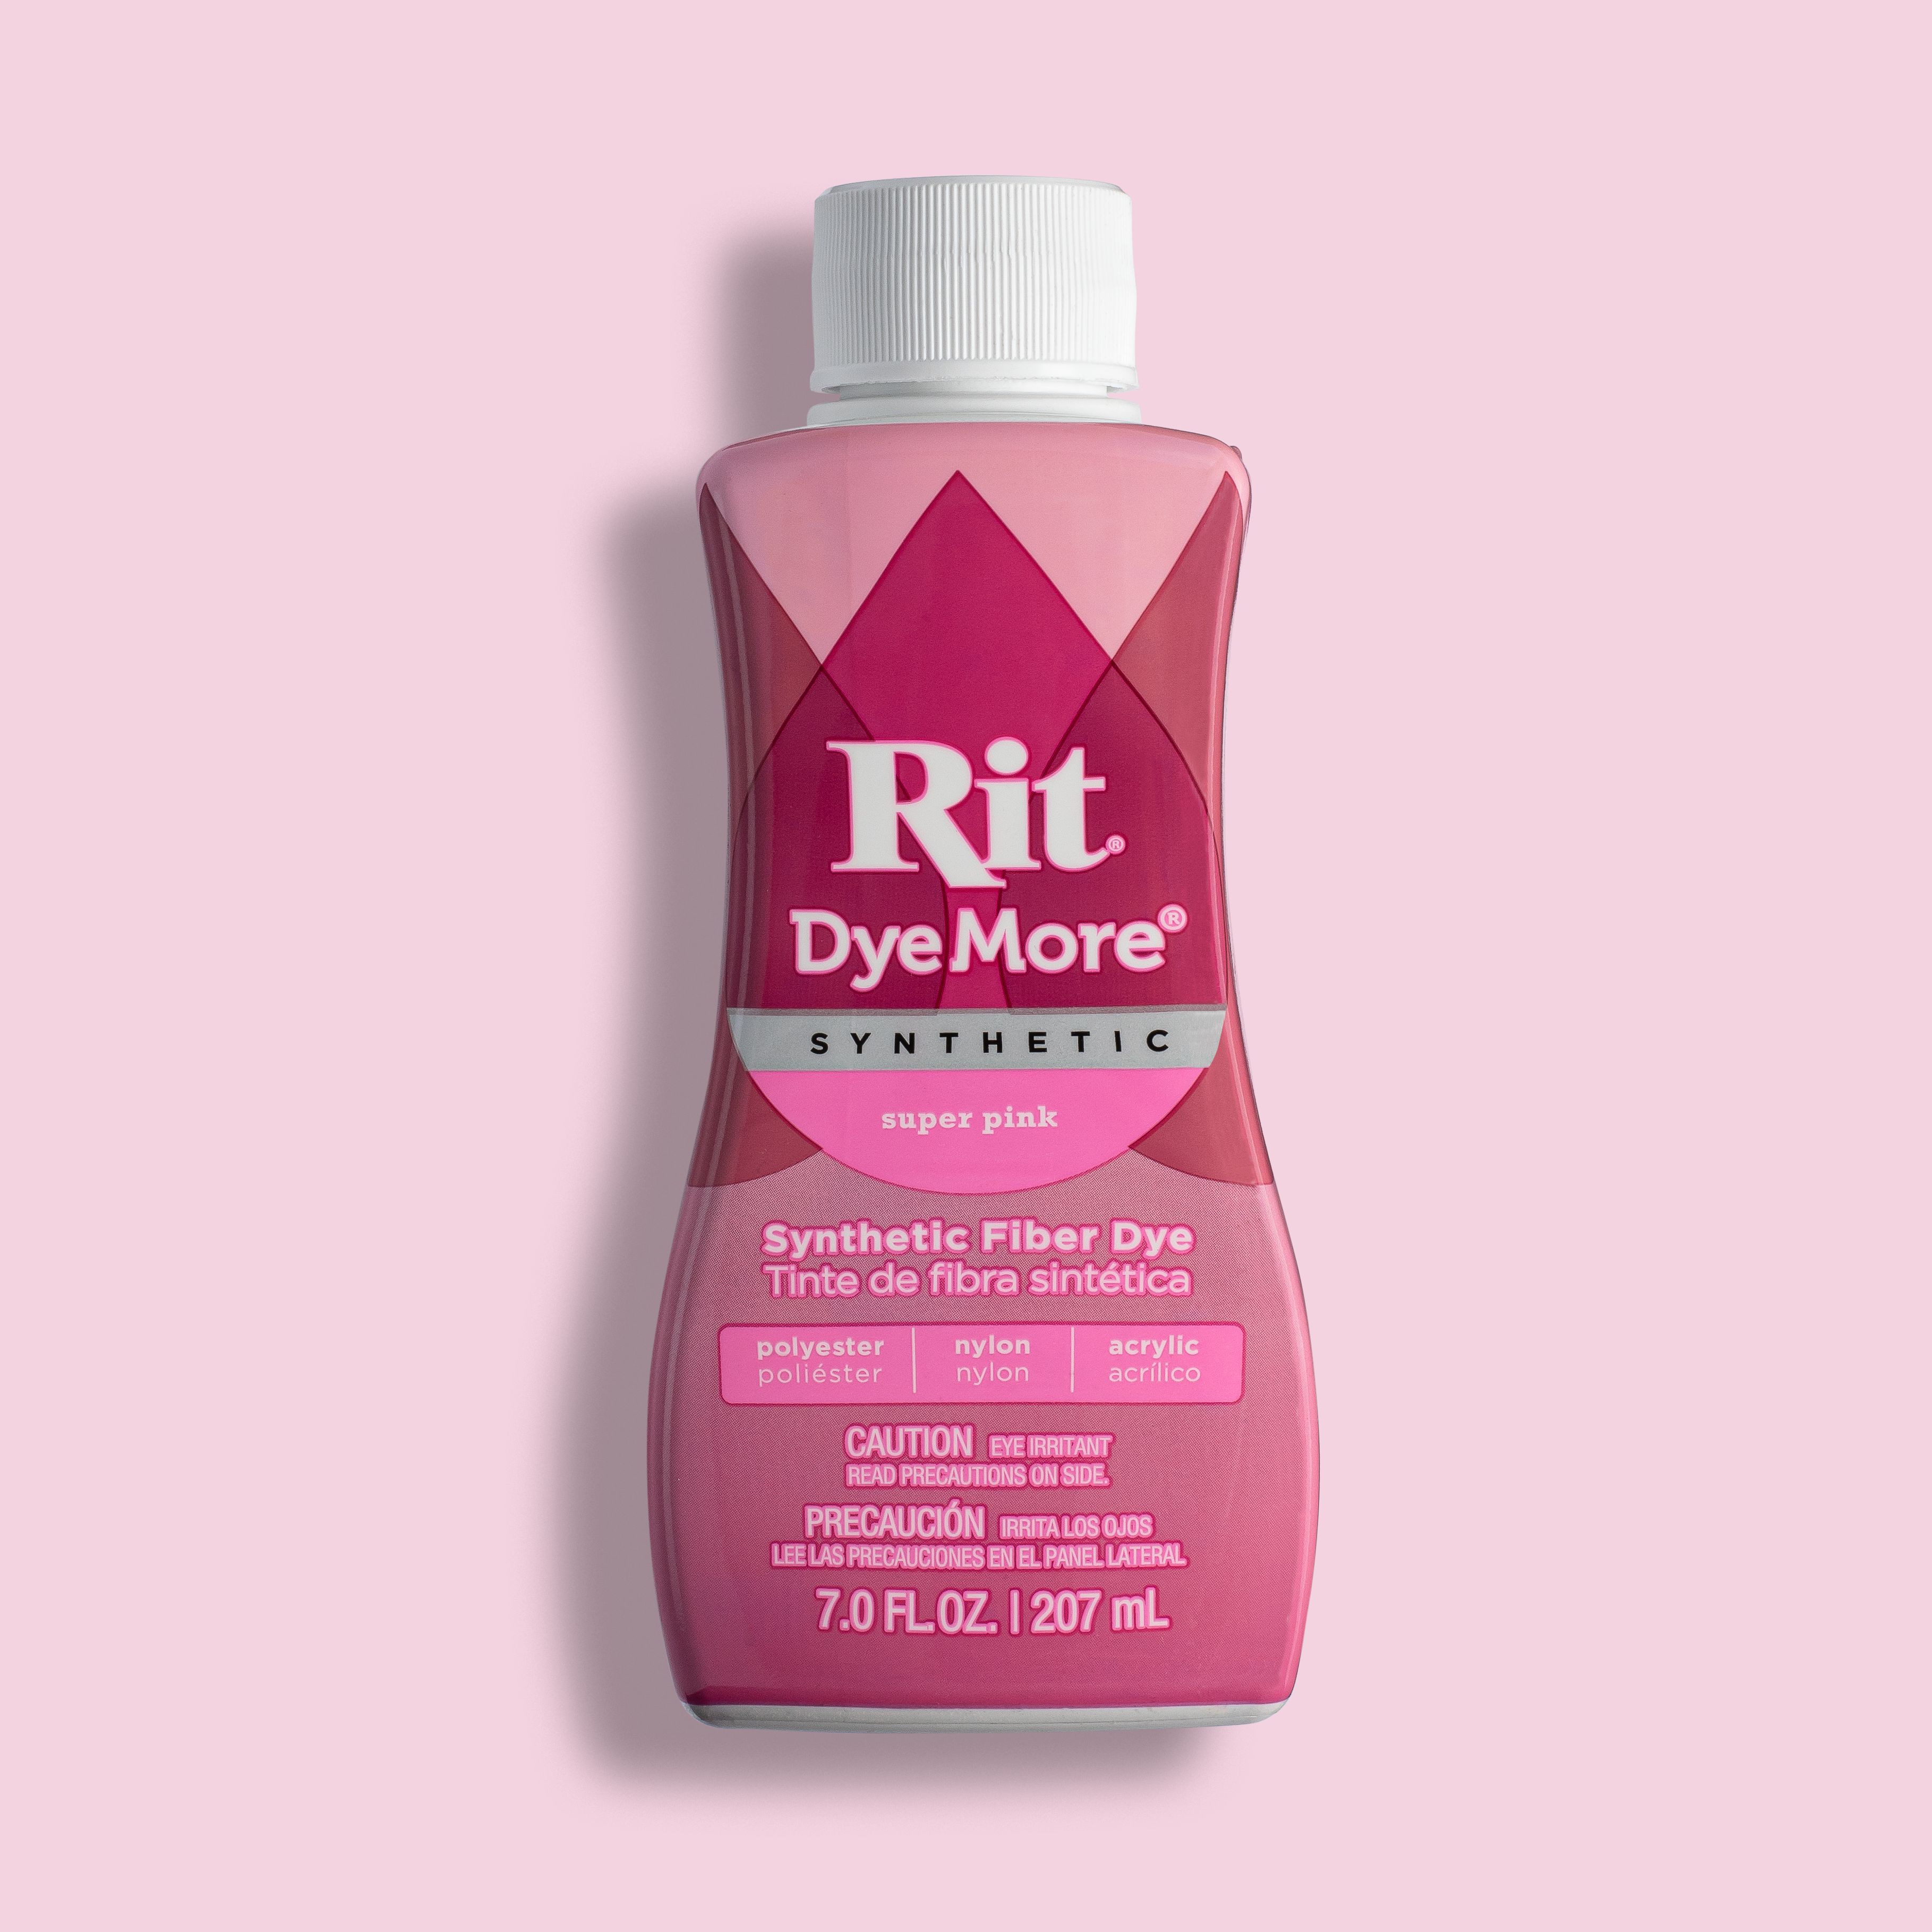 Super Pink DyeMore Dye for Synthetics: Rit Dye Online Store